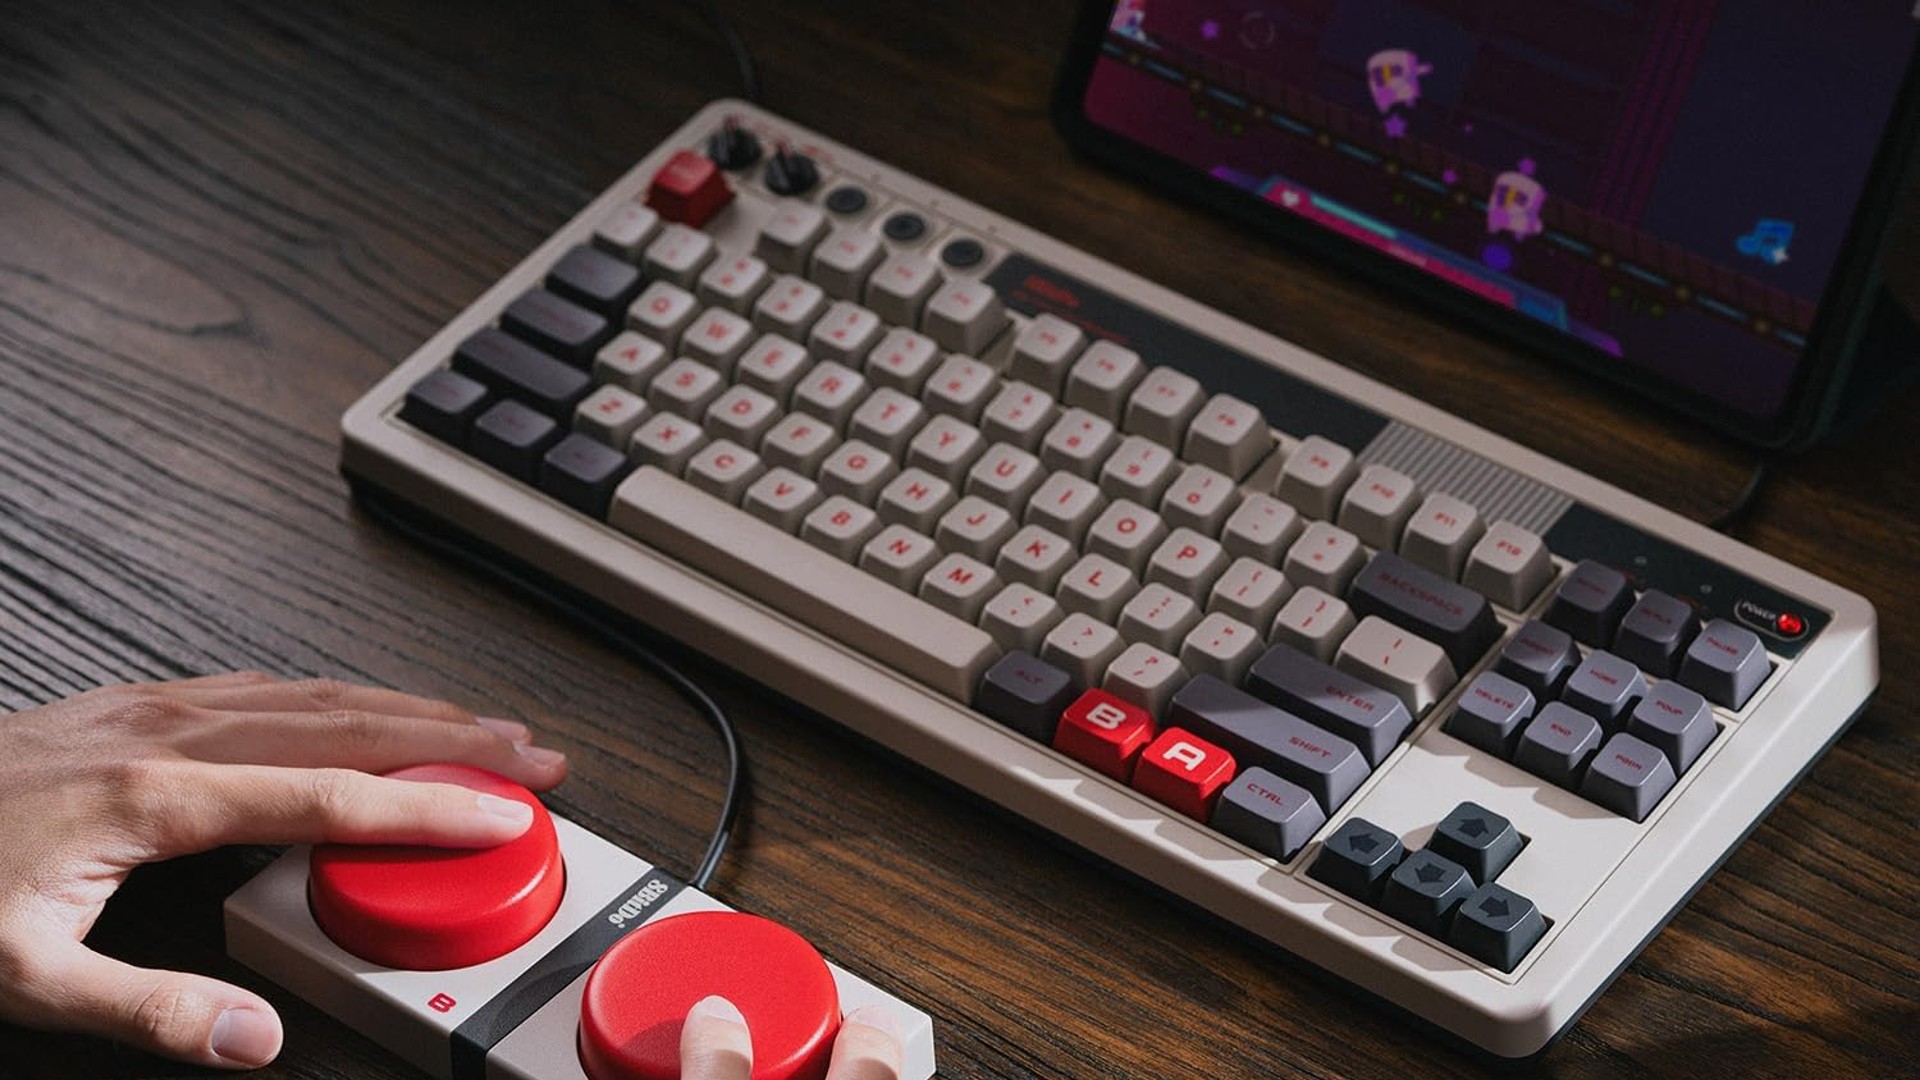 Grab a Nintendo-inspired retro gaming keyboard in limited time deal